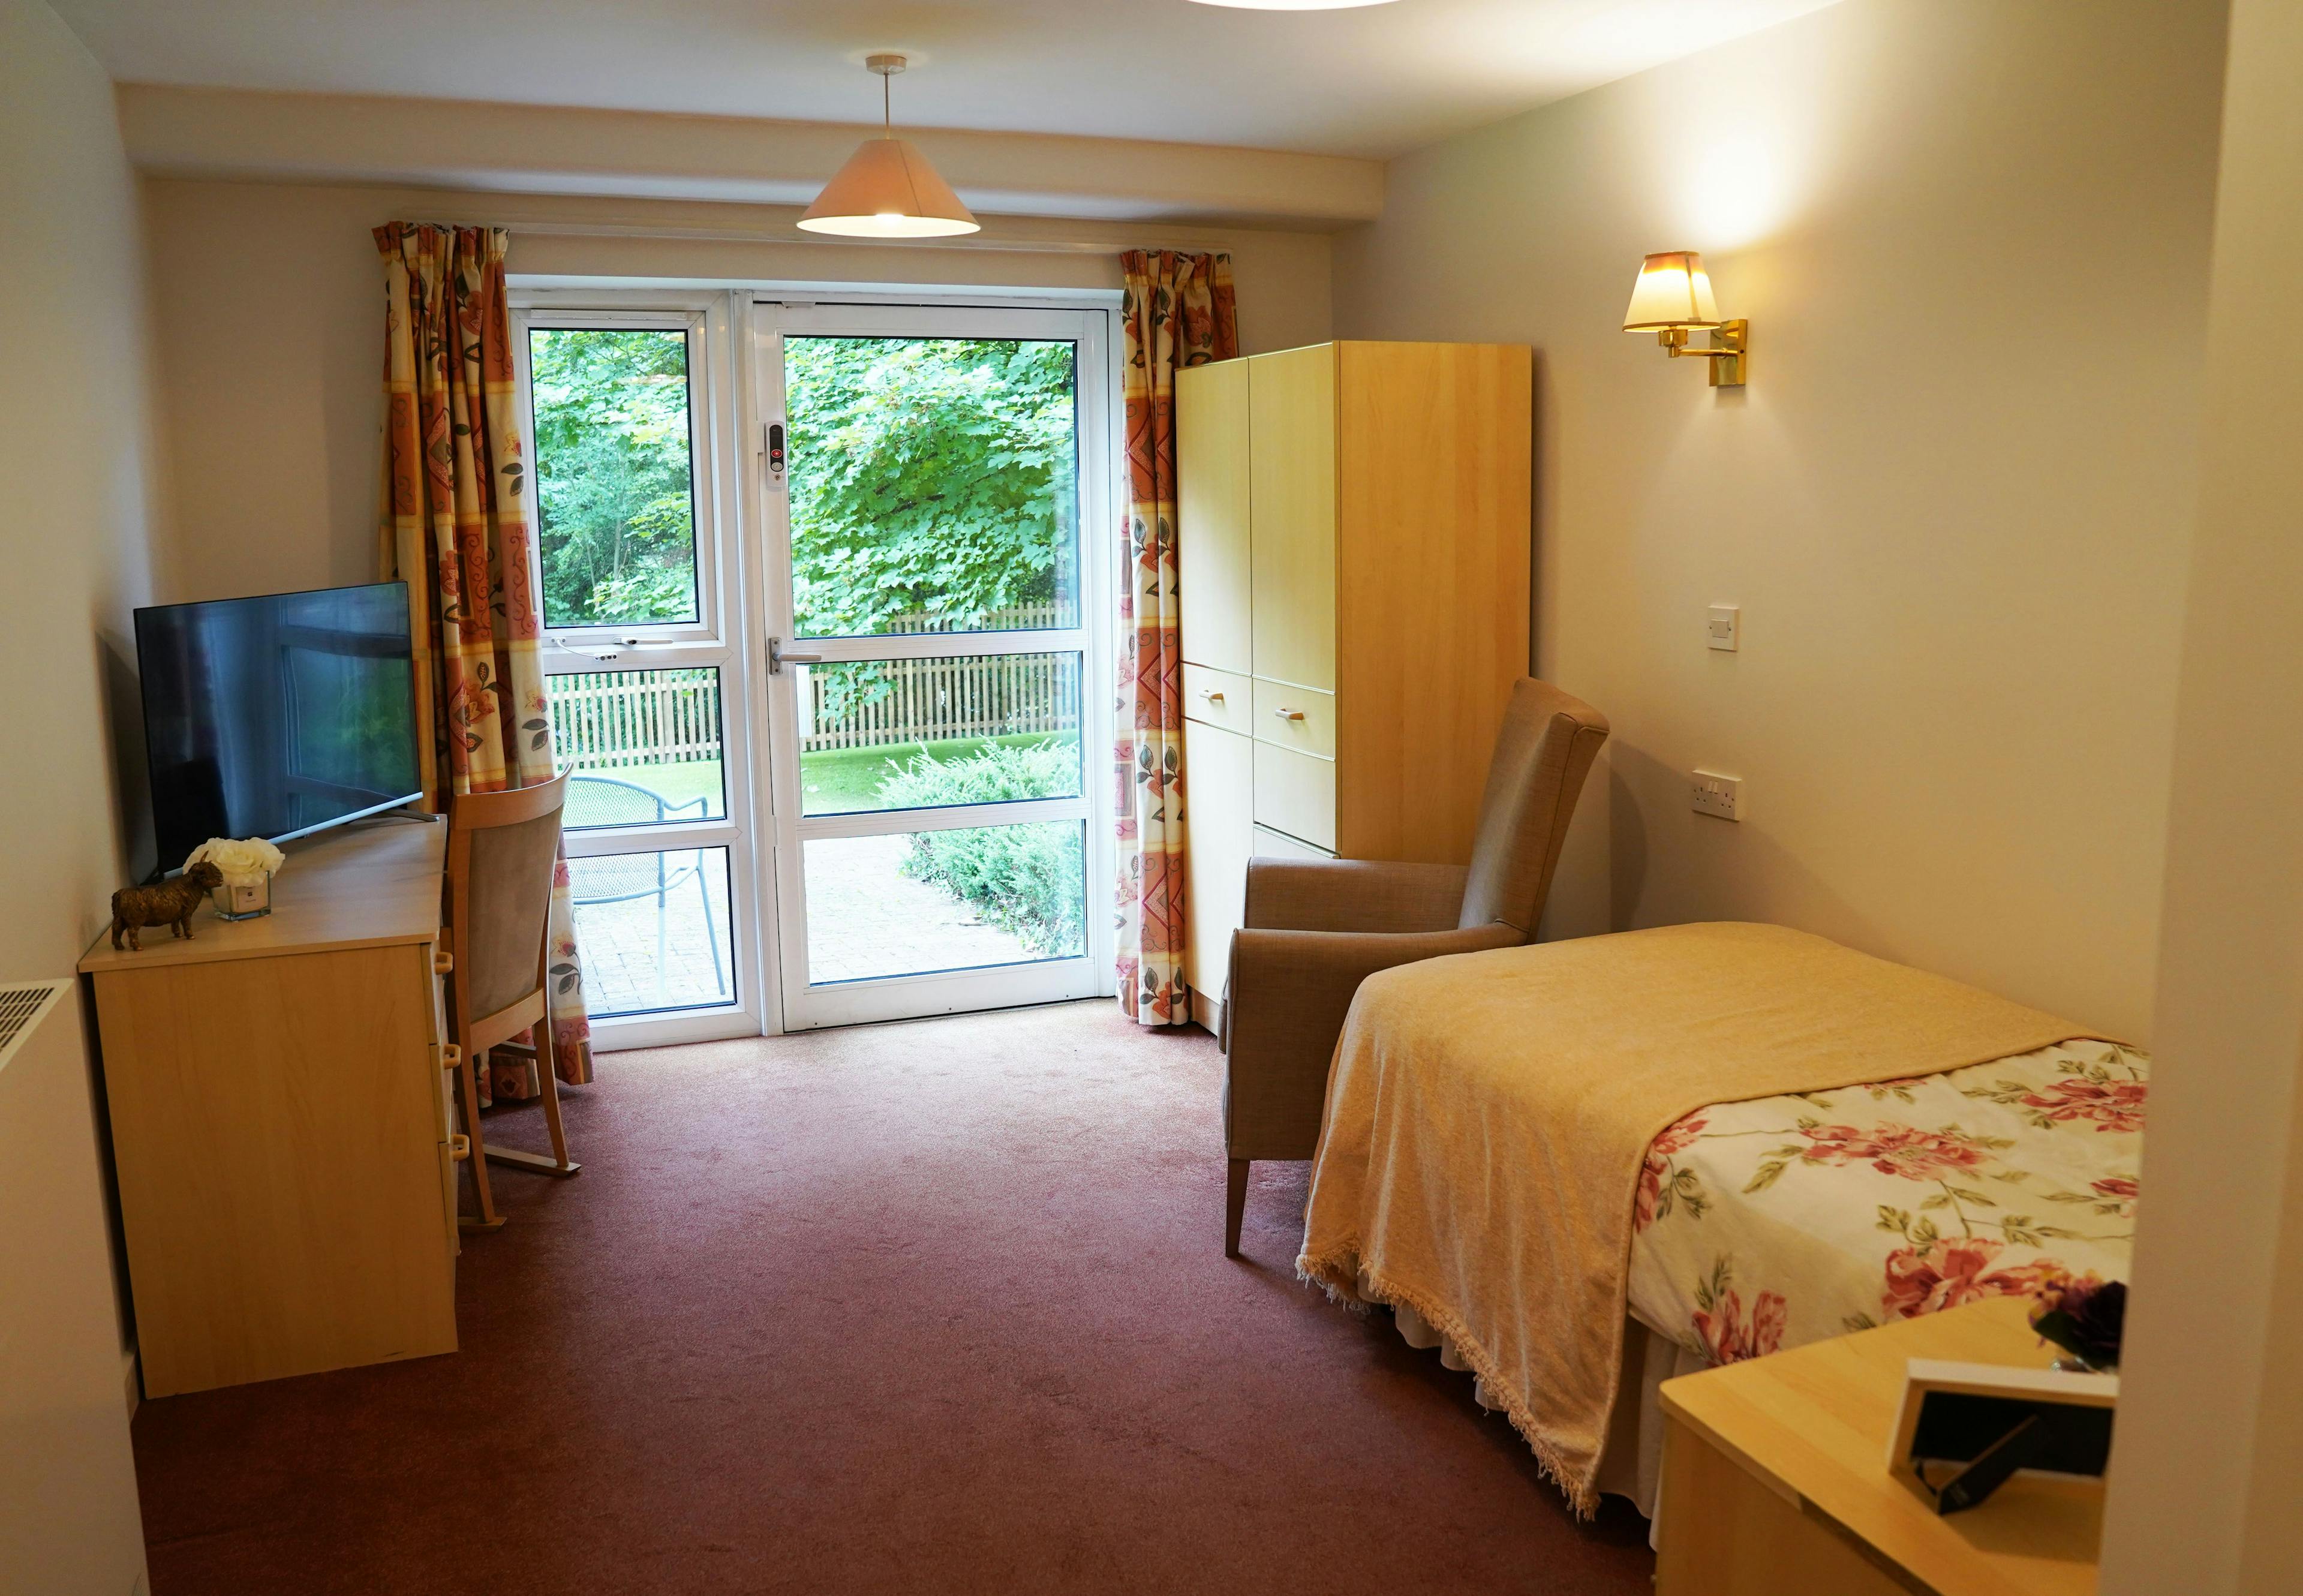 Bedroom at Brambles Court Care Home Redditch, Worcestershire